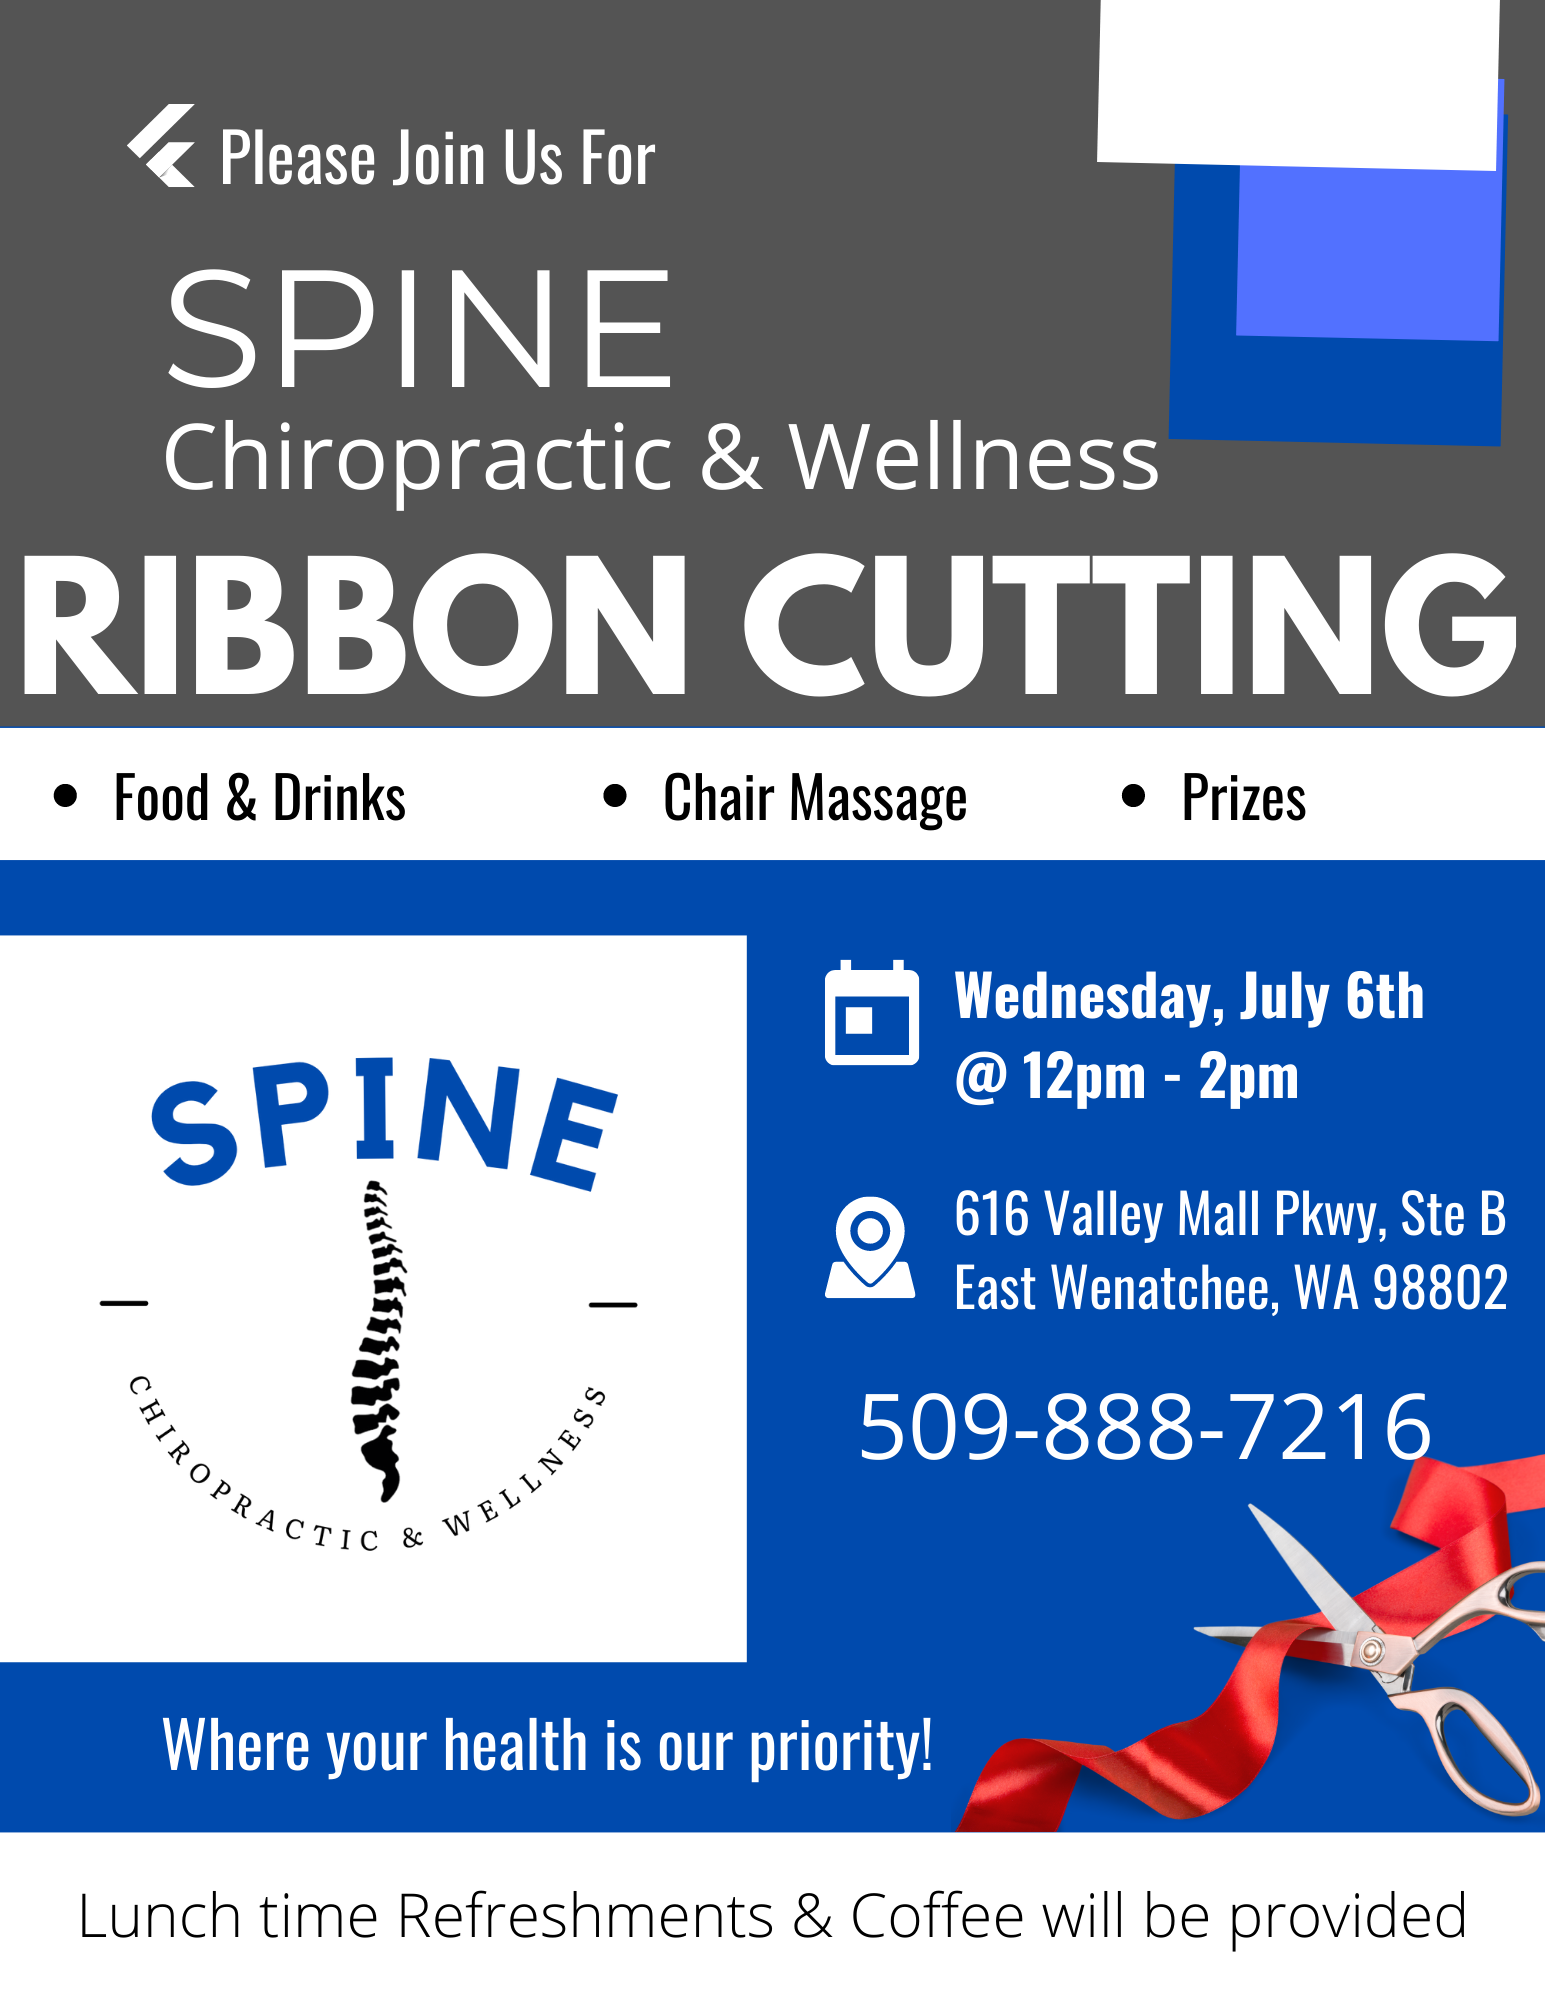 <h1 class="tribe-events-single-event-title">Spine Chiropractic Ribbon Cutting</h1>